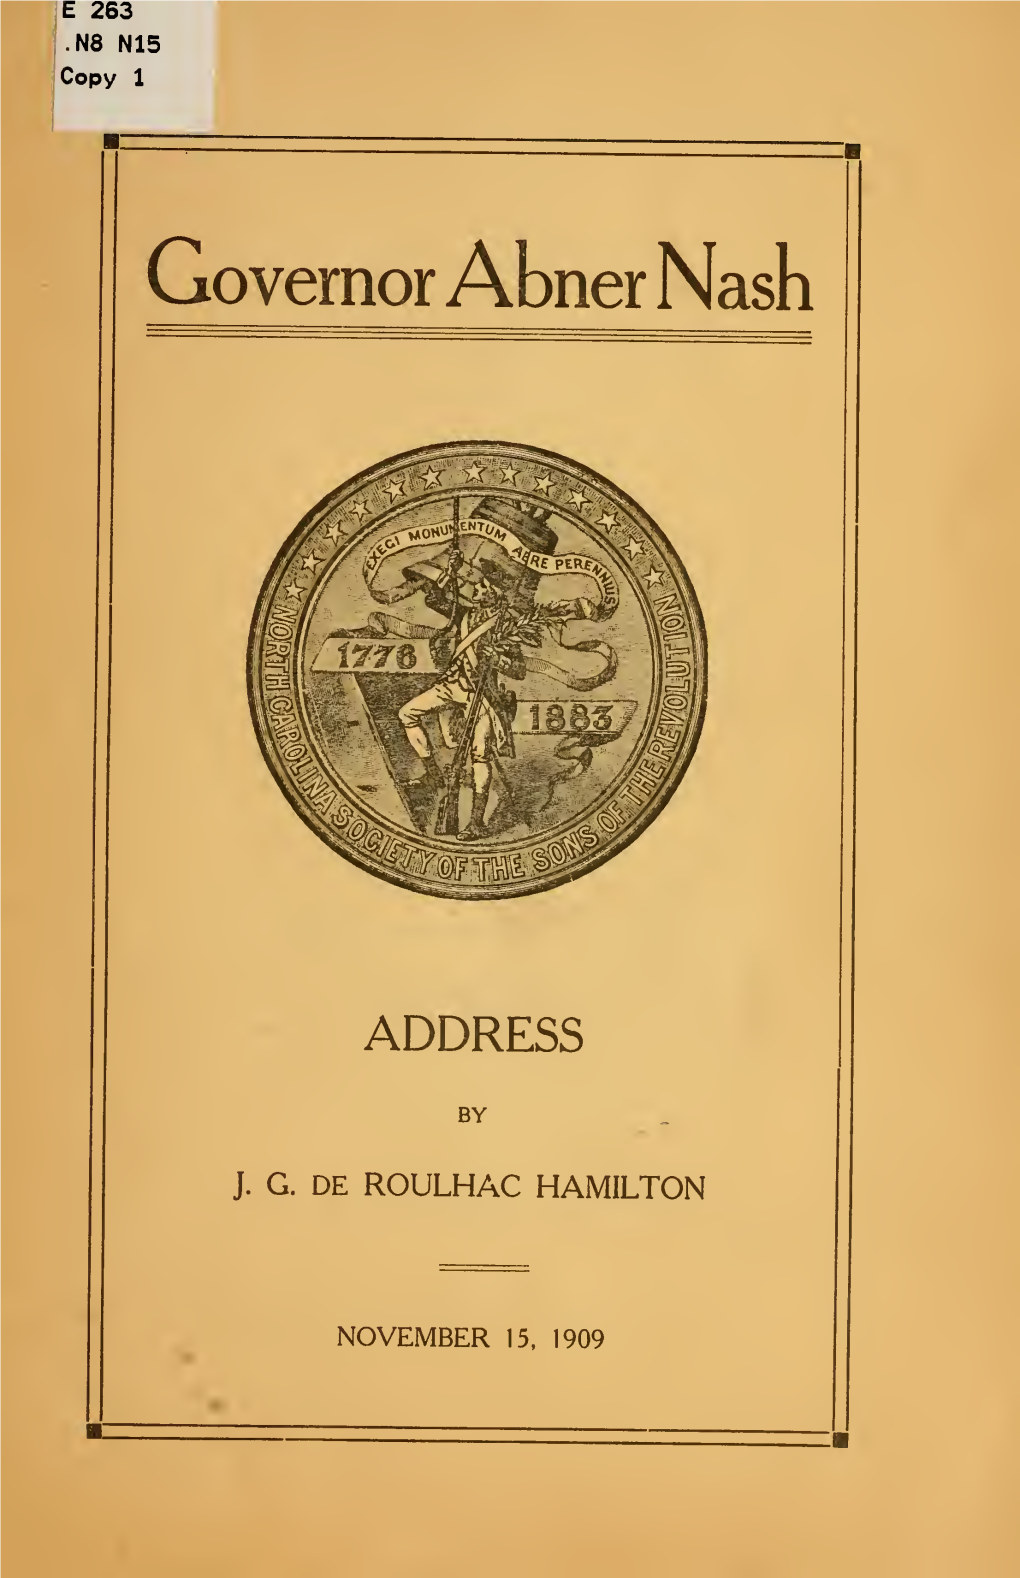 Presentation of Portrait of Governor Abner Nash to the State of North